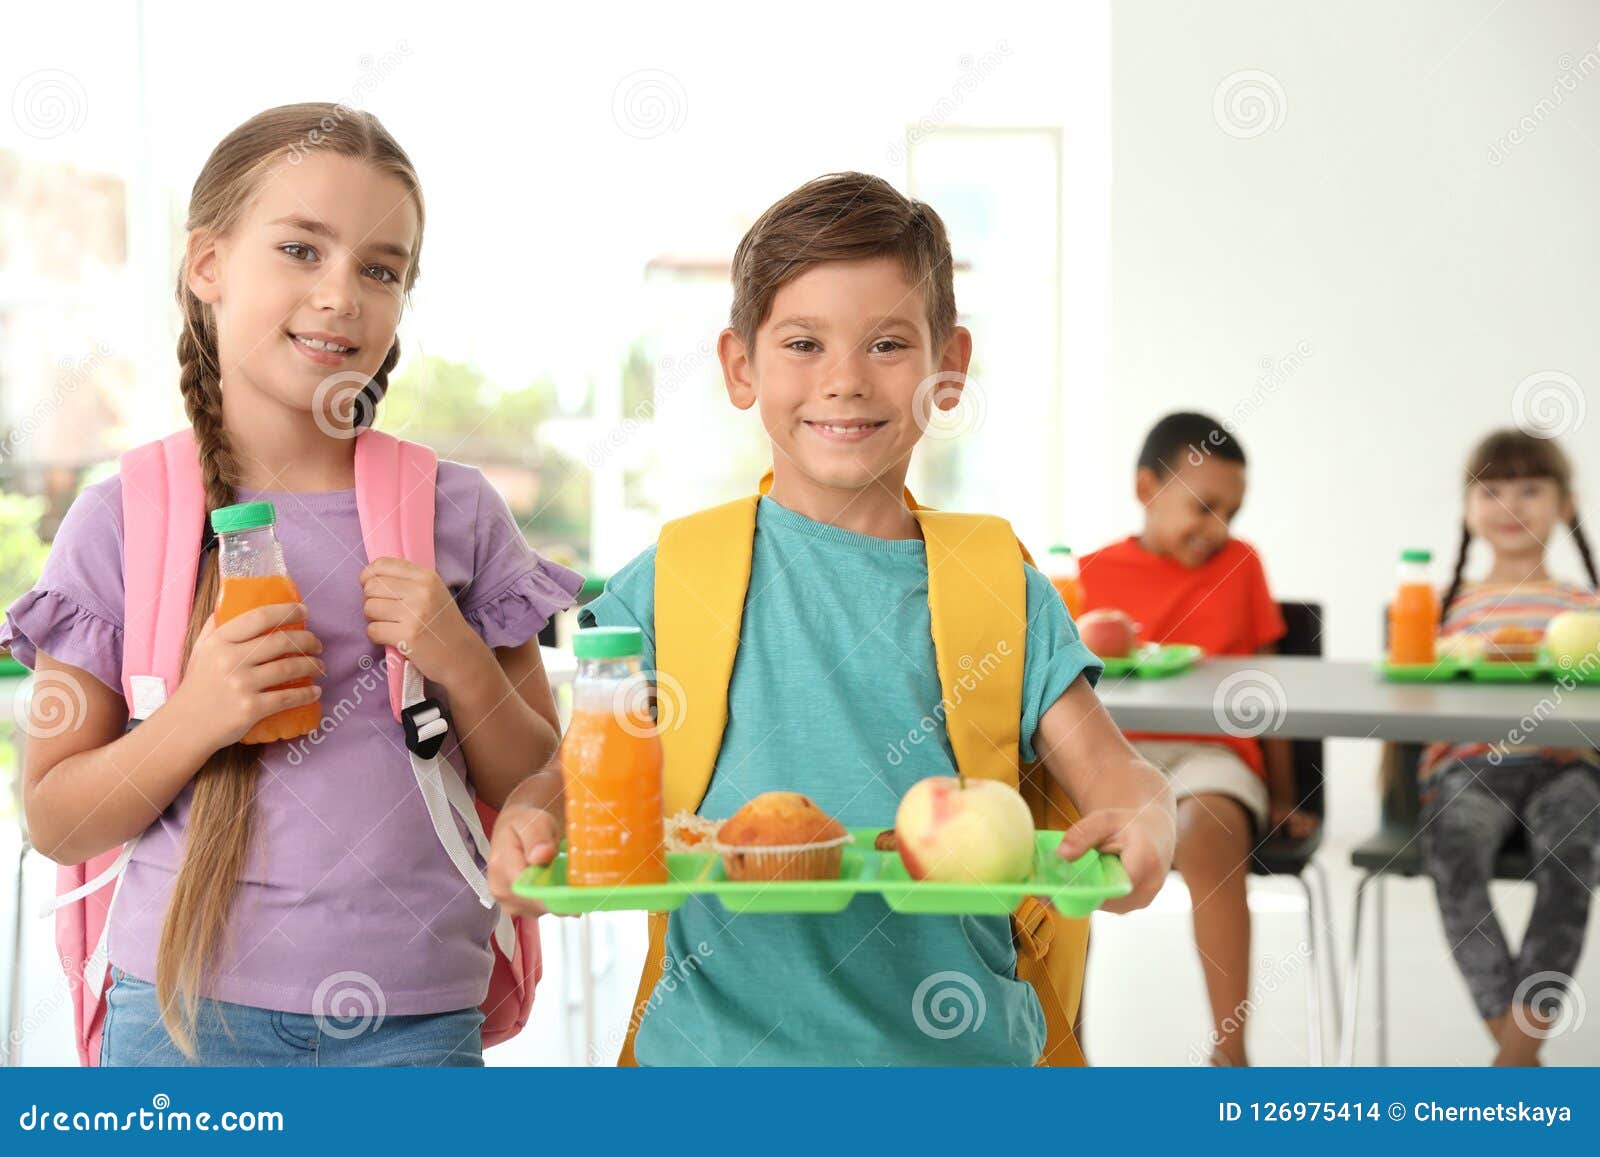 A Children Eating in the Canteen · Free Stock Photo